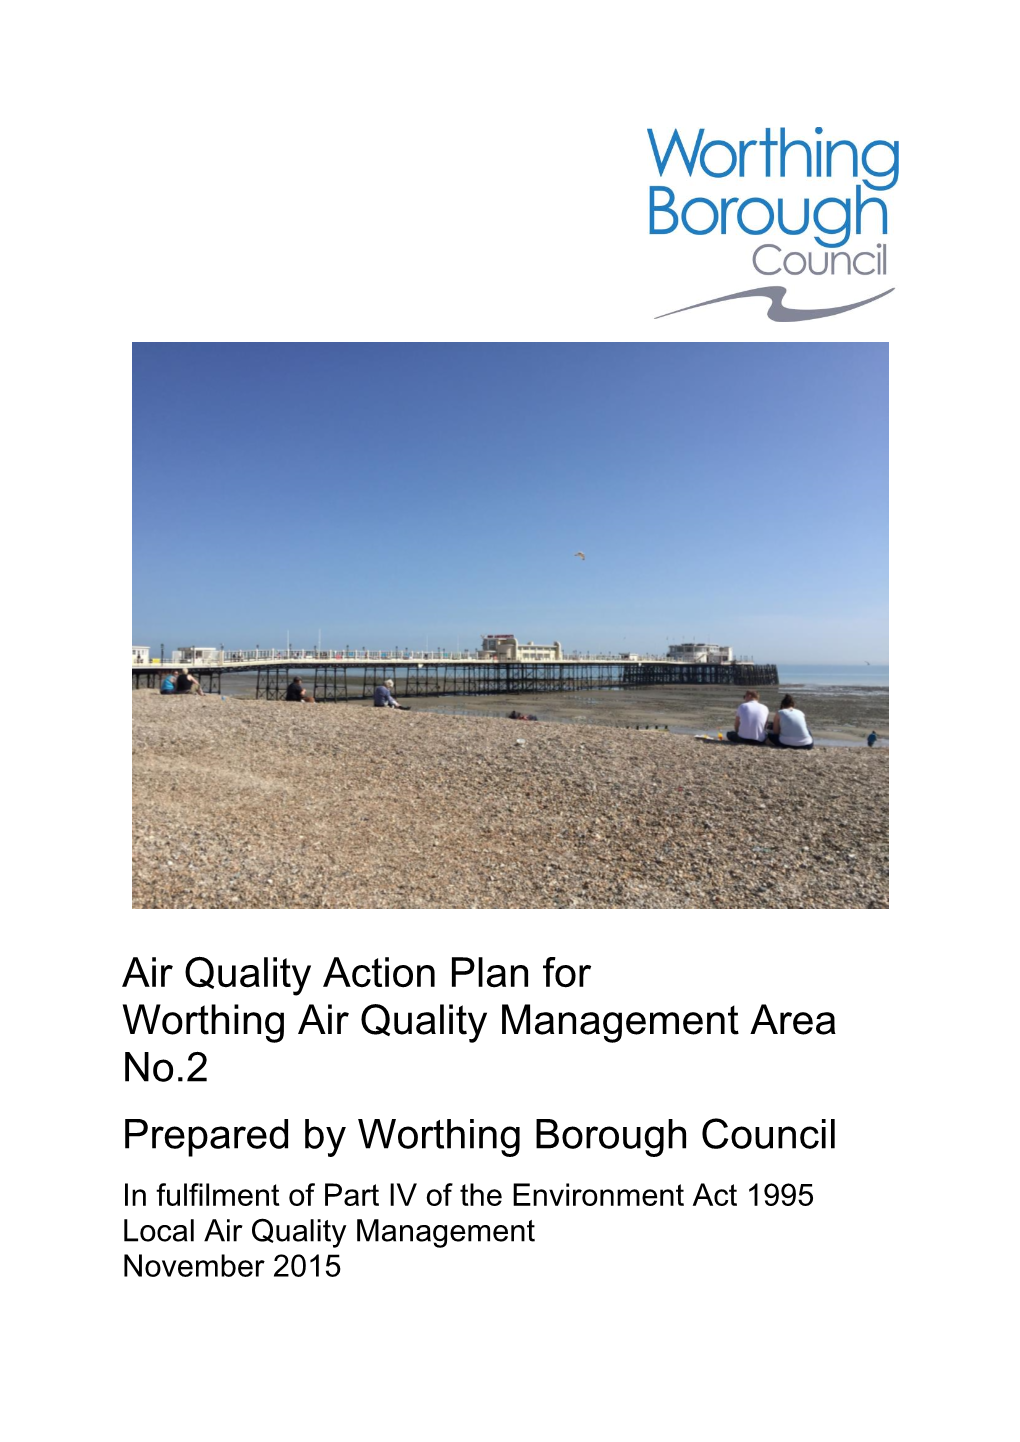 Air Quality Action Plan for Worthing Air Quality Management Area No.2